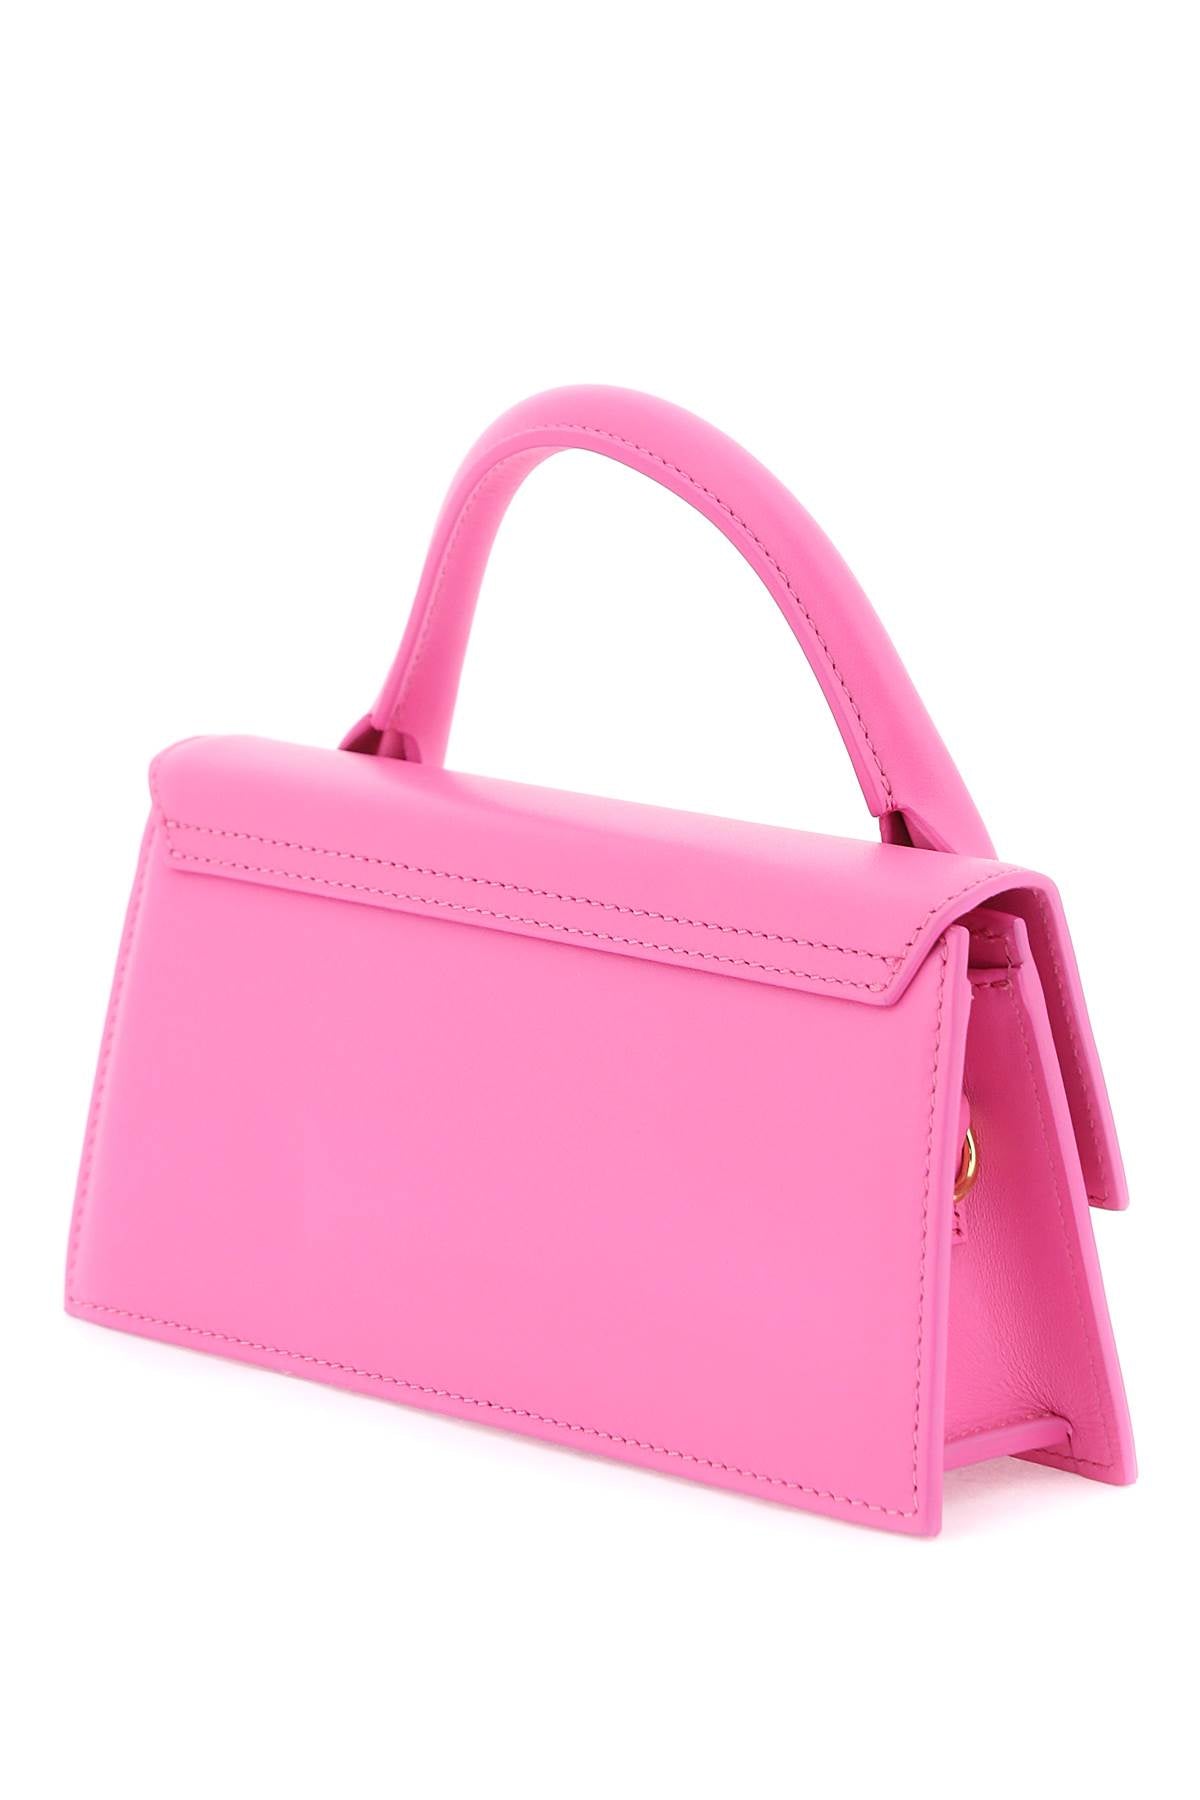 JACQUEMUS SS24 Mini Neon Pink Leather Crossbody Bag for Women